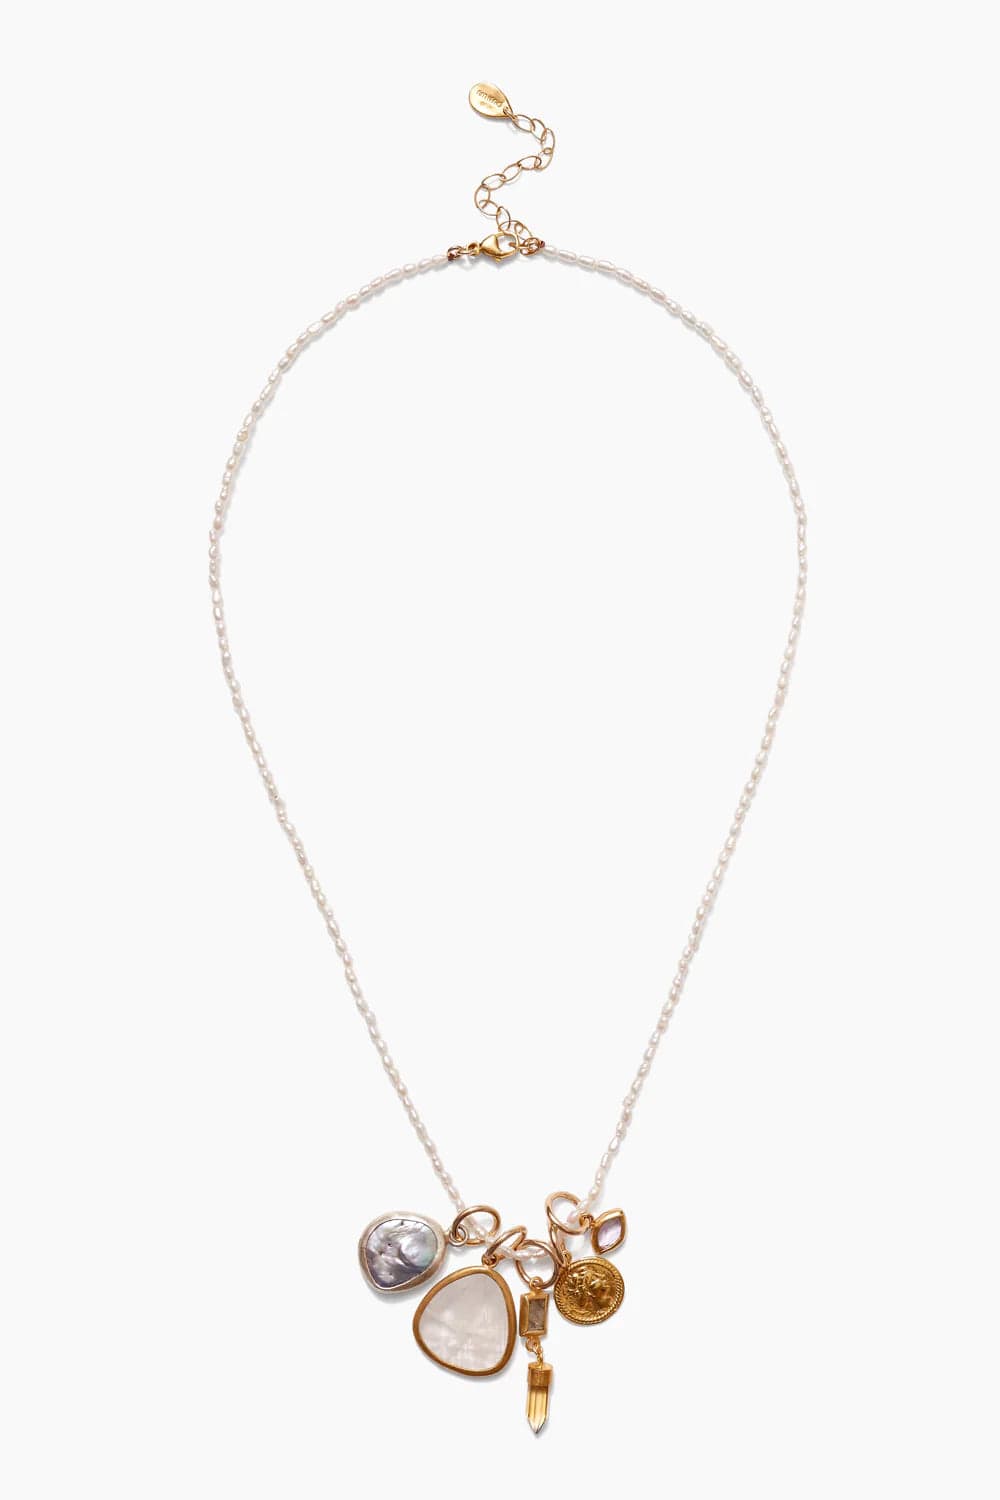 NKL-GPL Hypatia Charm Necklace - White Pearl Mix